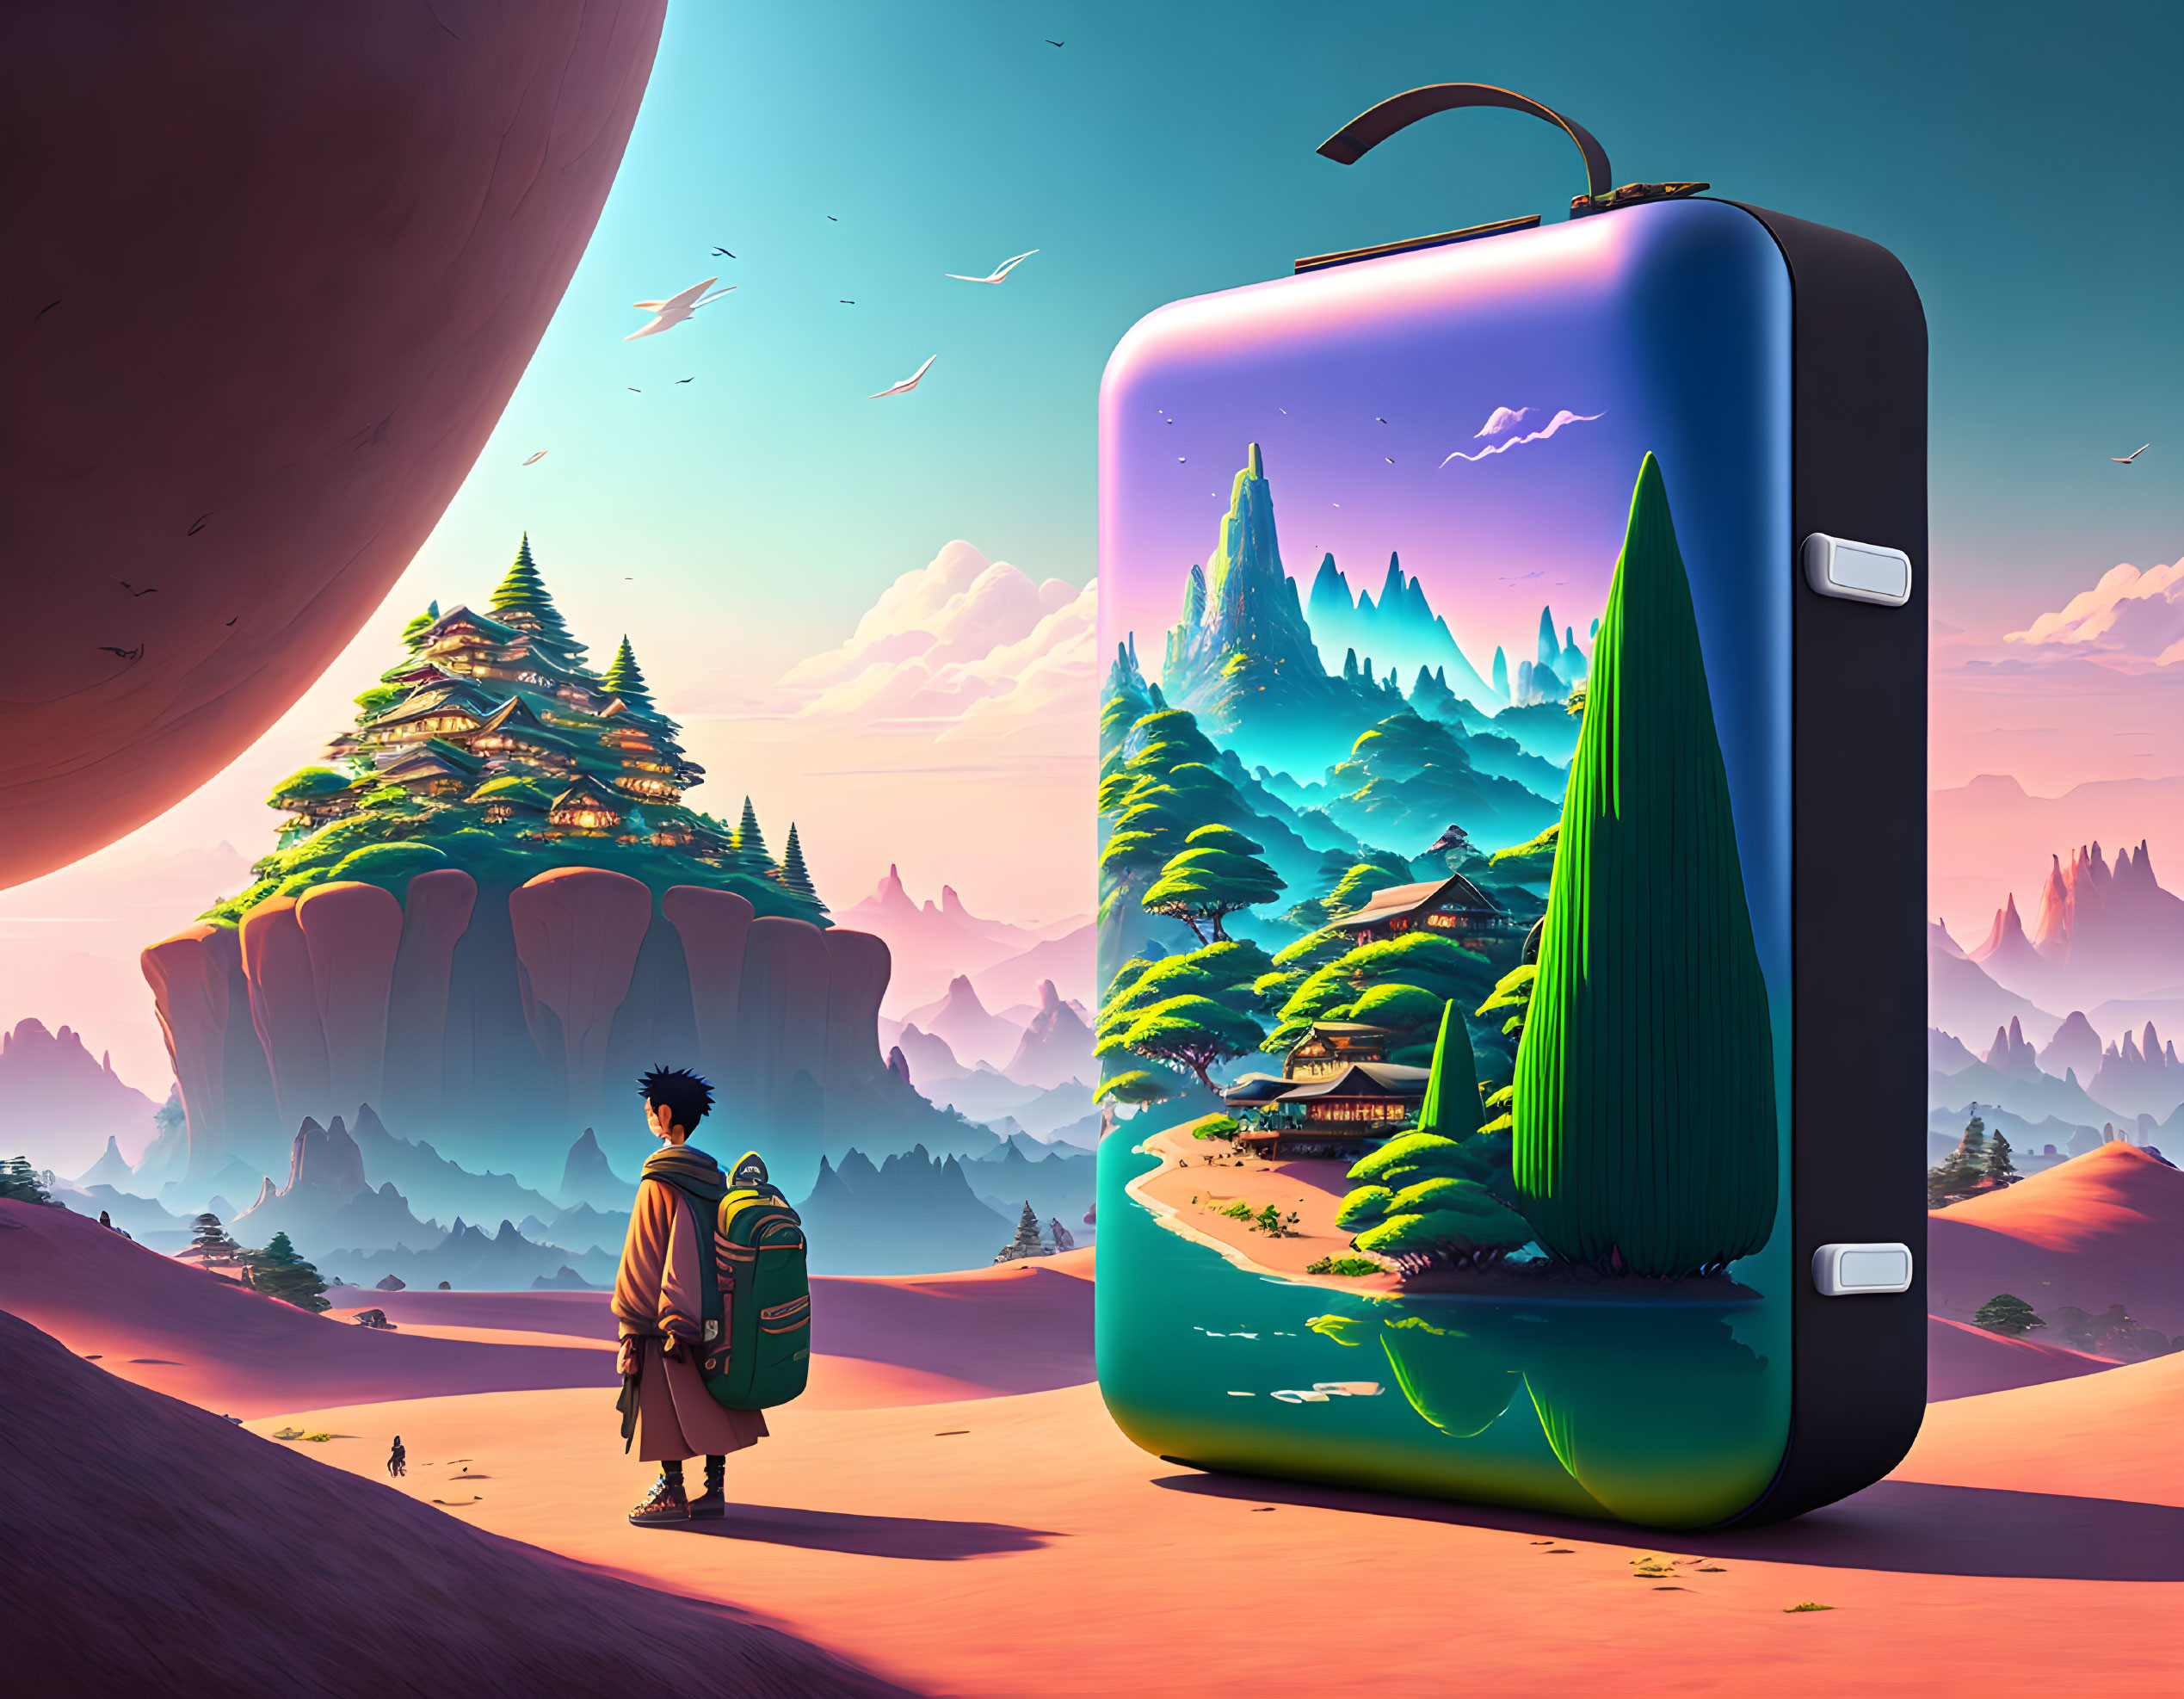 Fantasy landscape scene in giant suitcase with mountains, trees, birds, and pink sky.